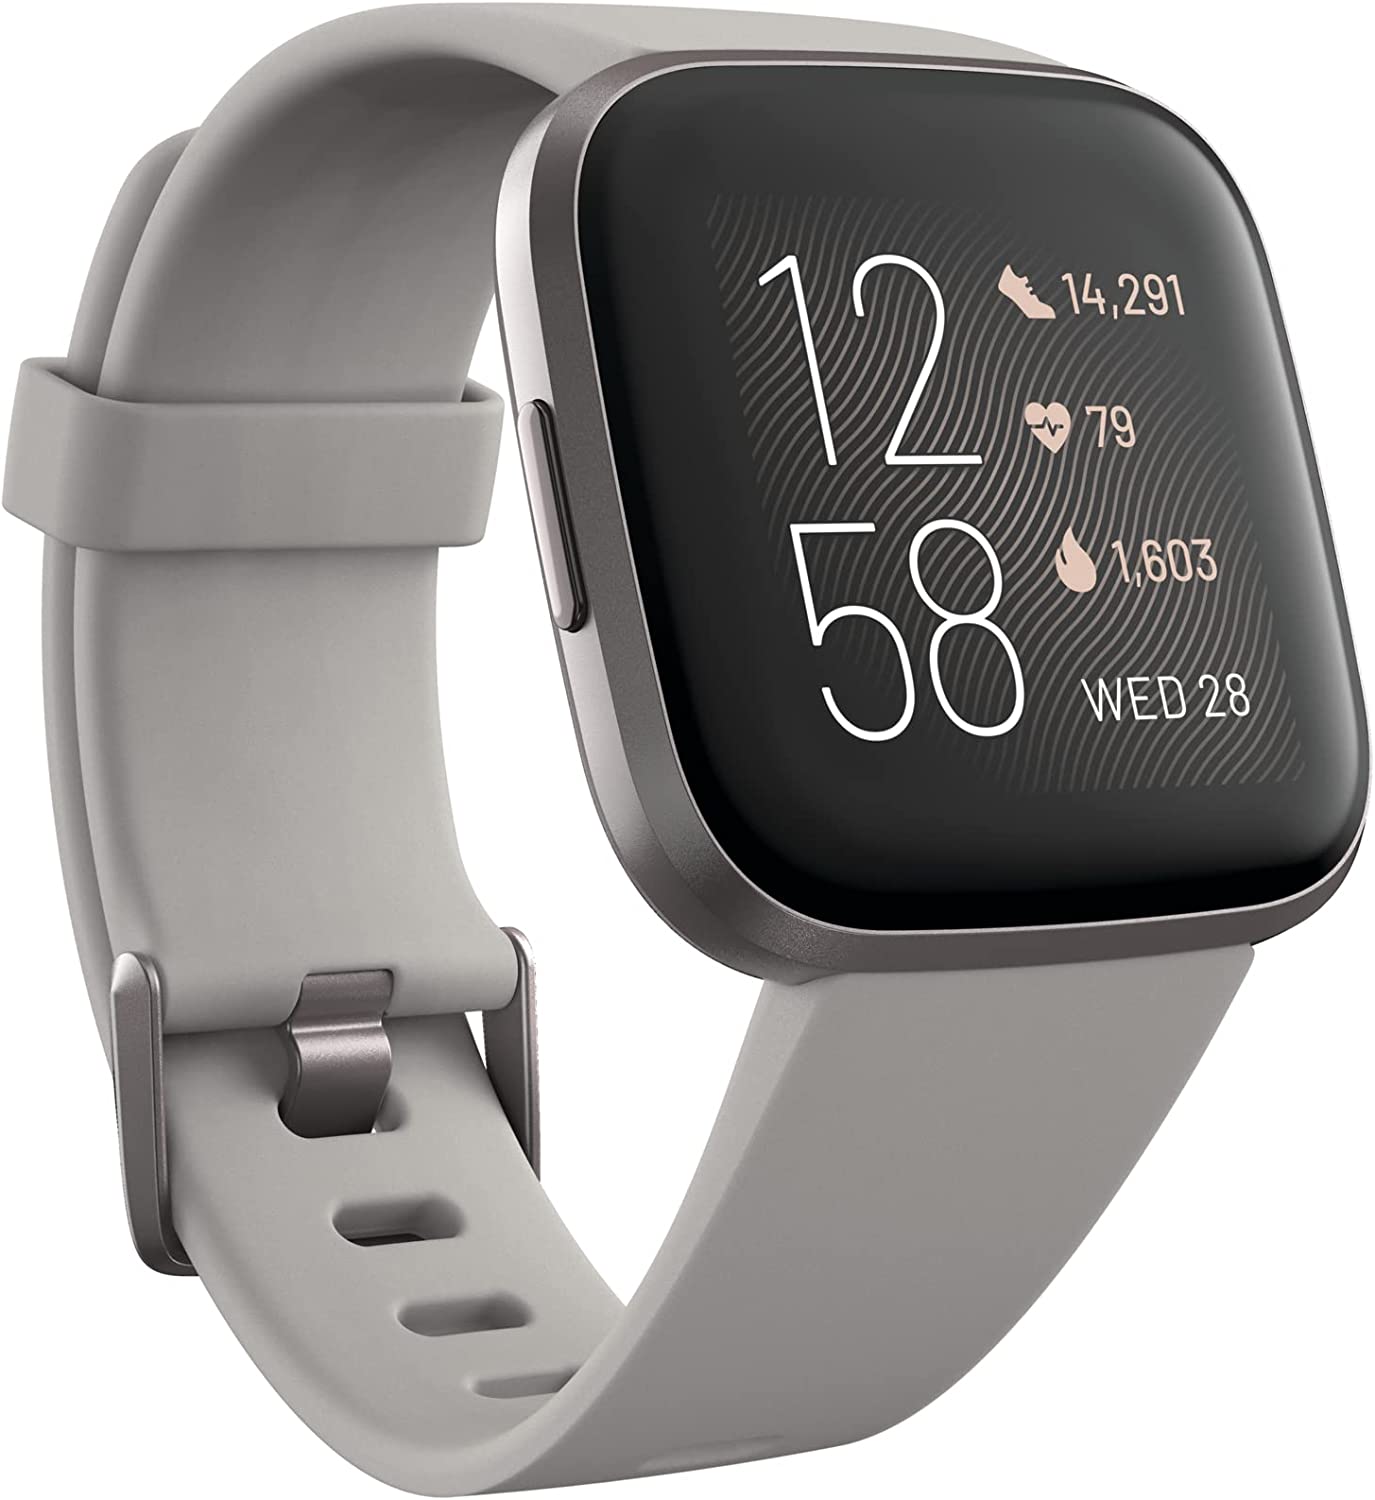 Fitbit Versa 2 Health and Fitness Smartwatch with Heart Rate - Stone/Mist Grey (New)